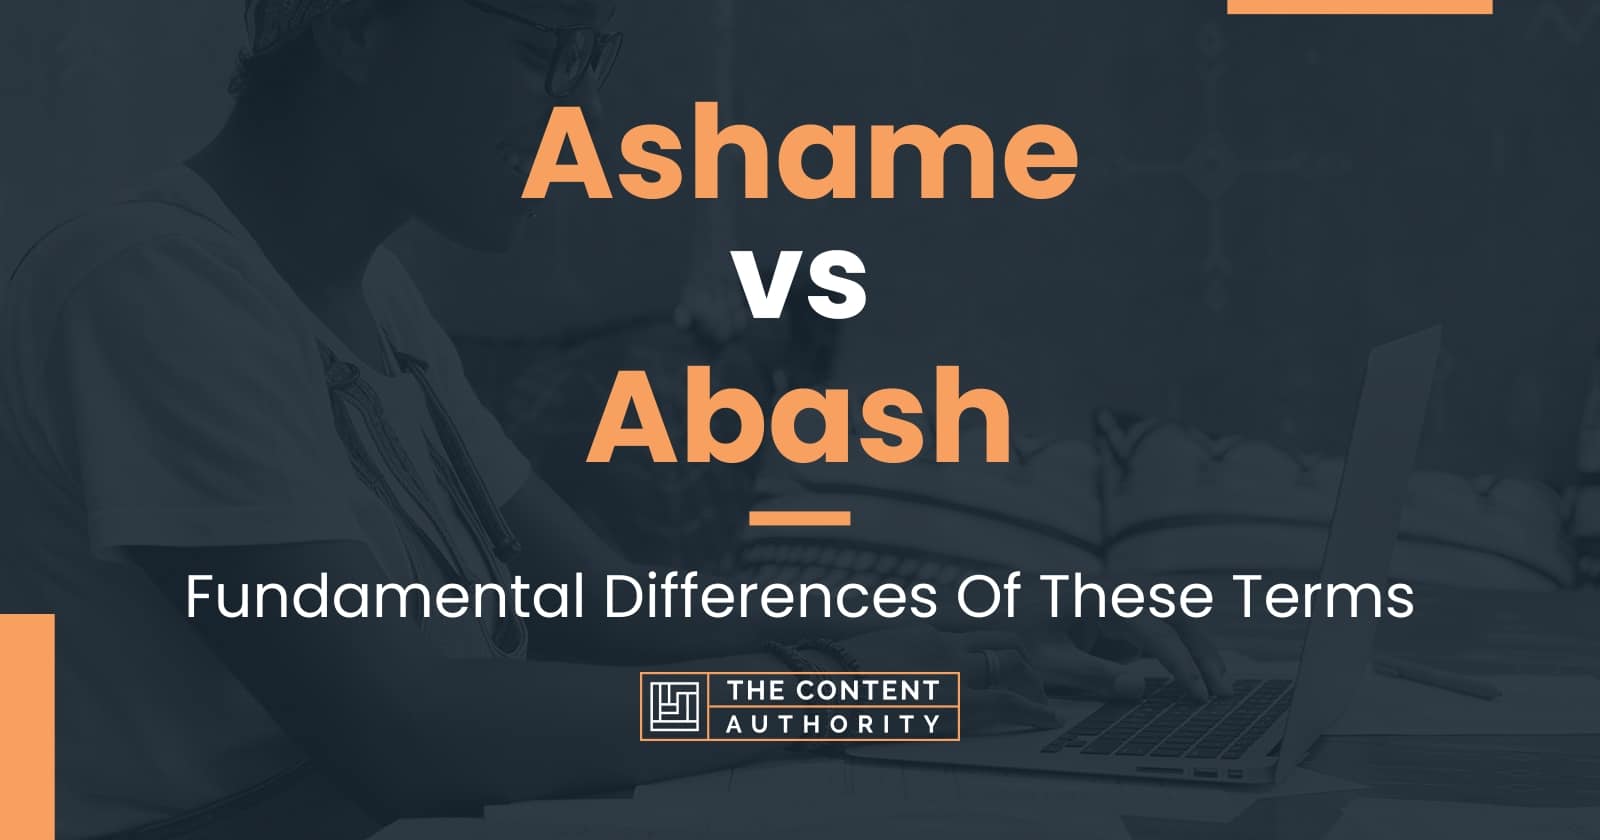 Ashame vs Abash: Fundamental Differences Of These Terms